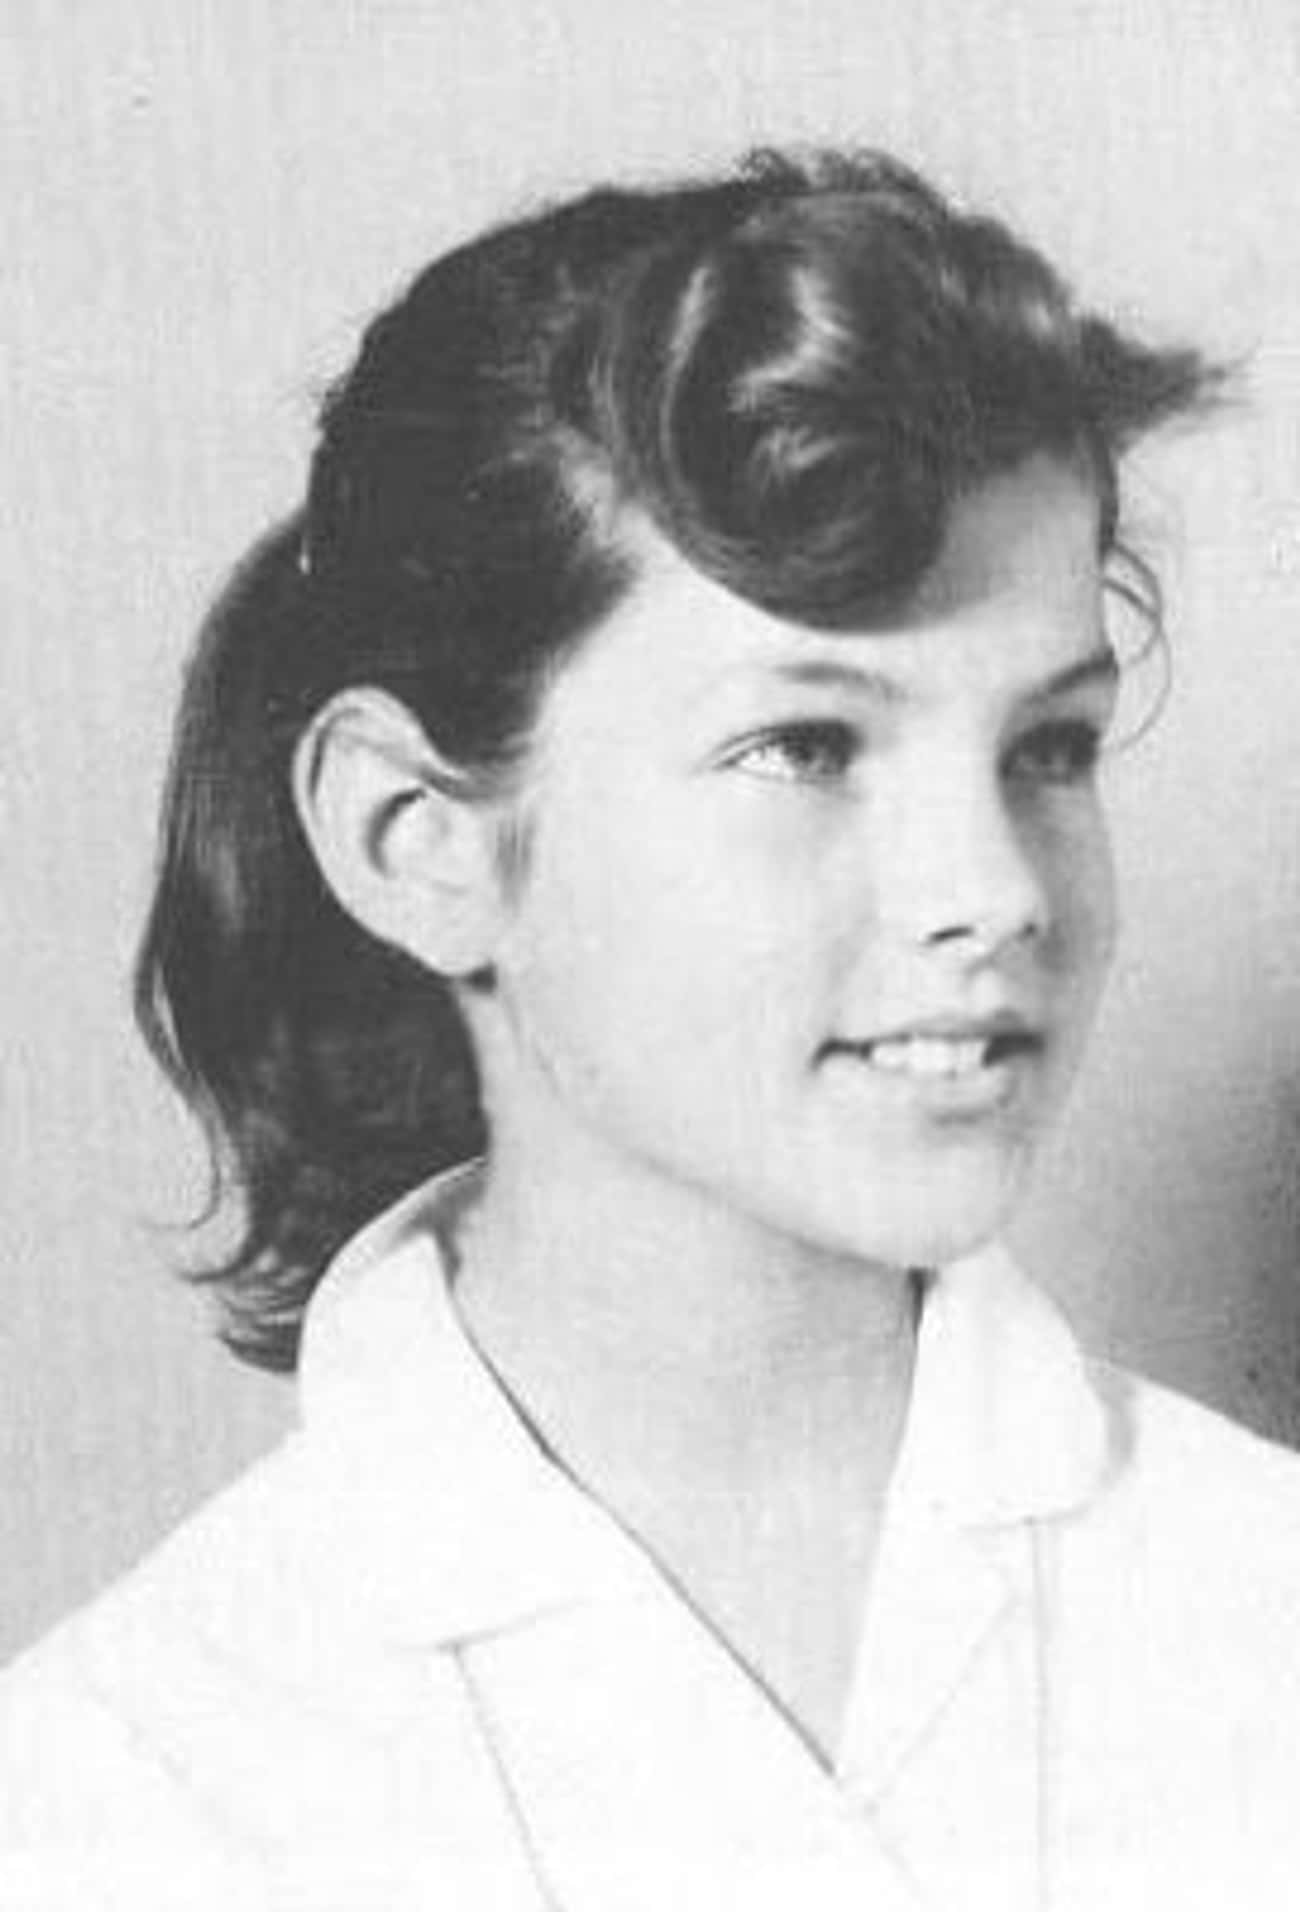 Young Priscilla Presley in a White Blouse as a Teenager